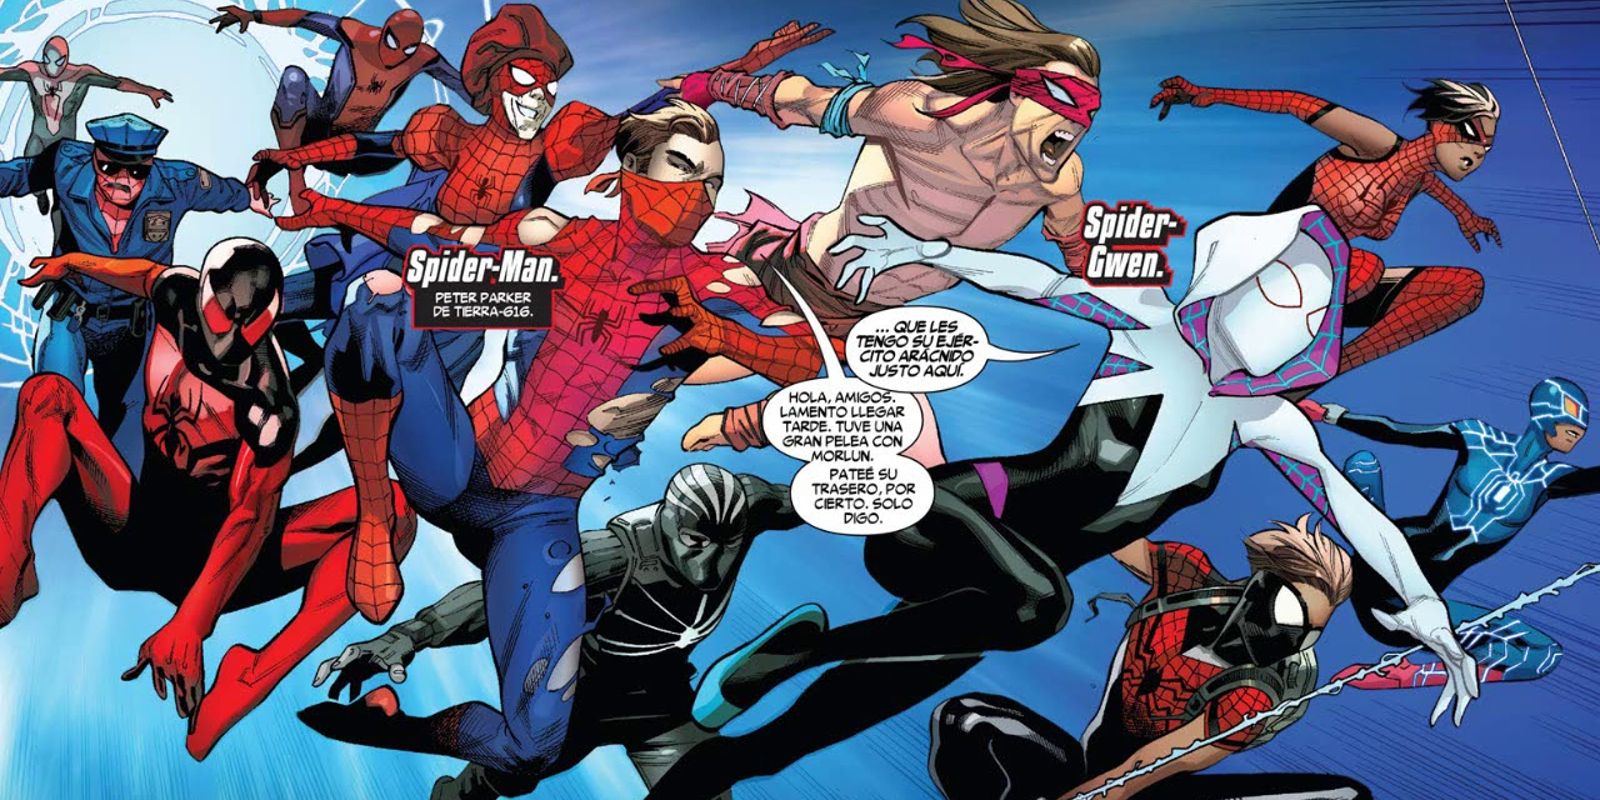 Spider Gwen leading an army of Spider People into battle in Spider Geddon